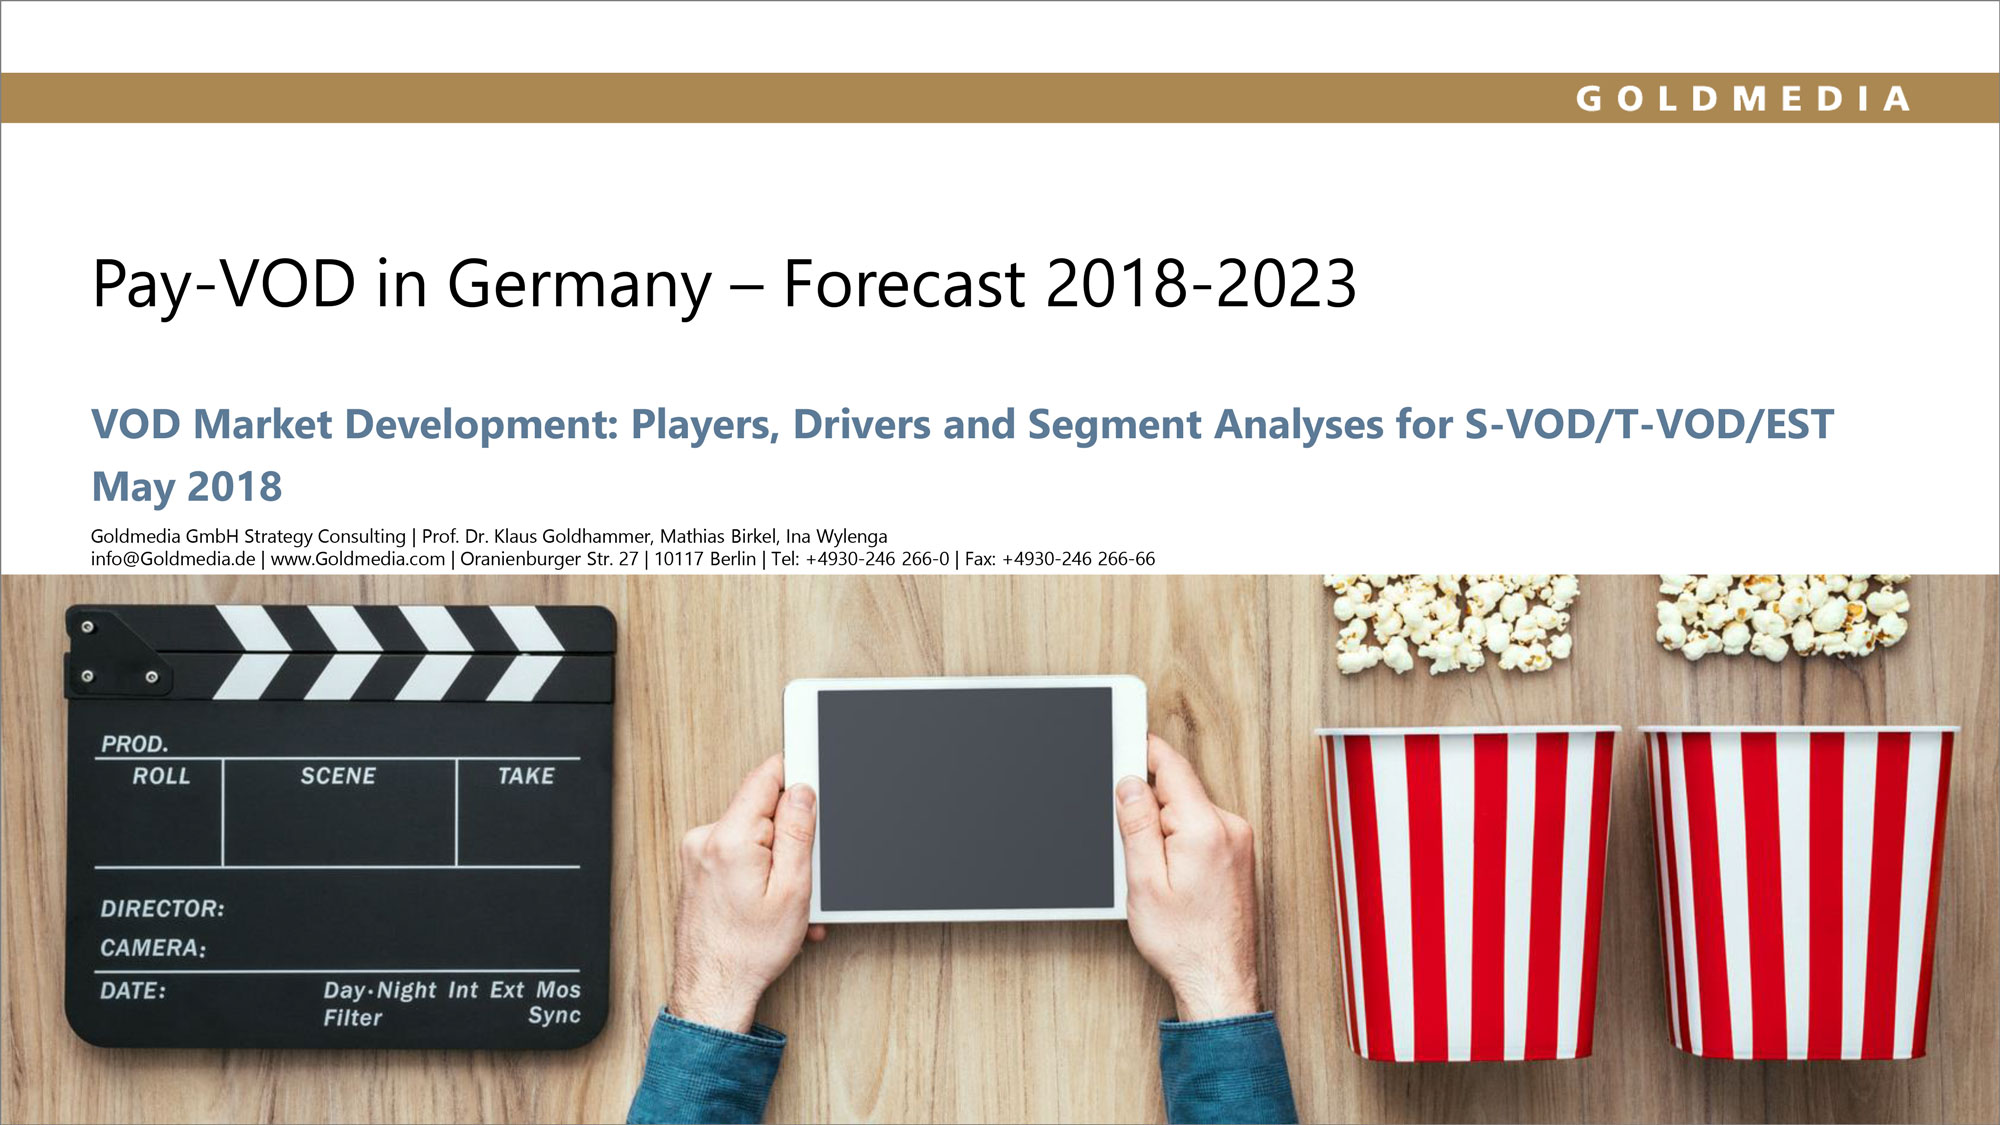 Goldmedia Pay-VOD in Germany